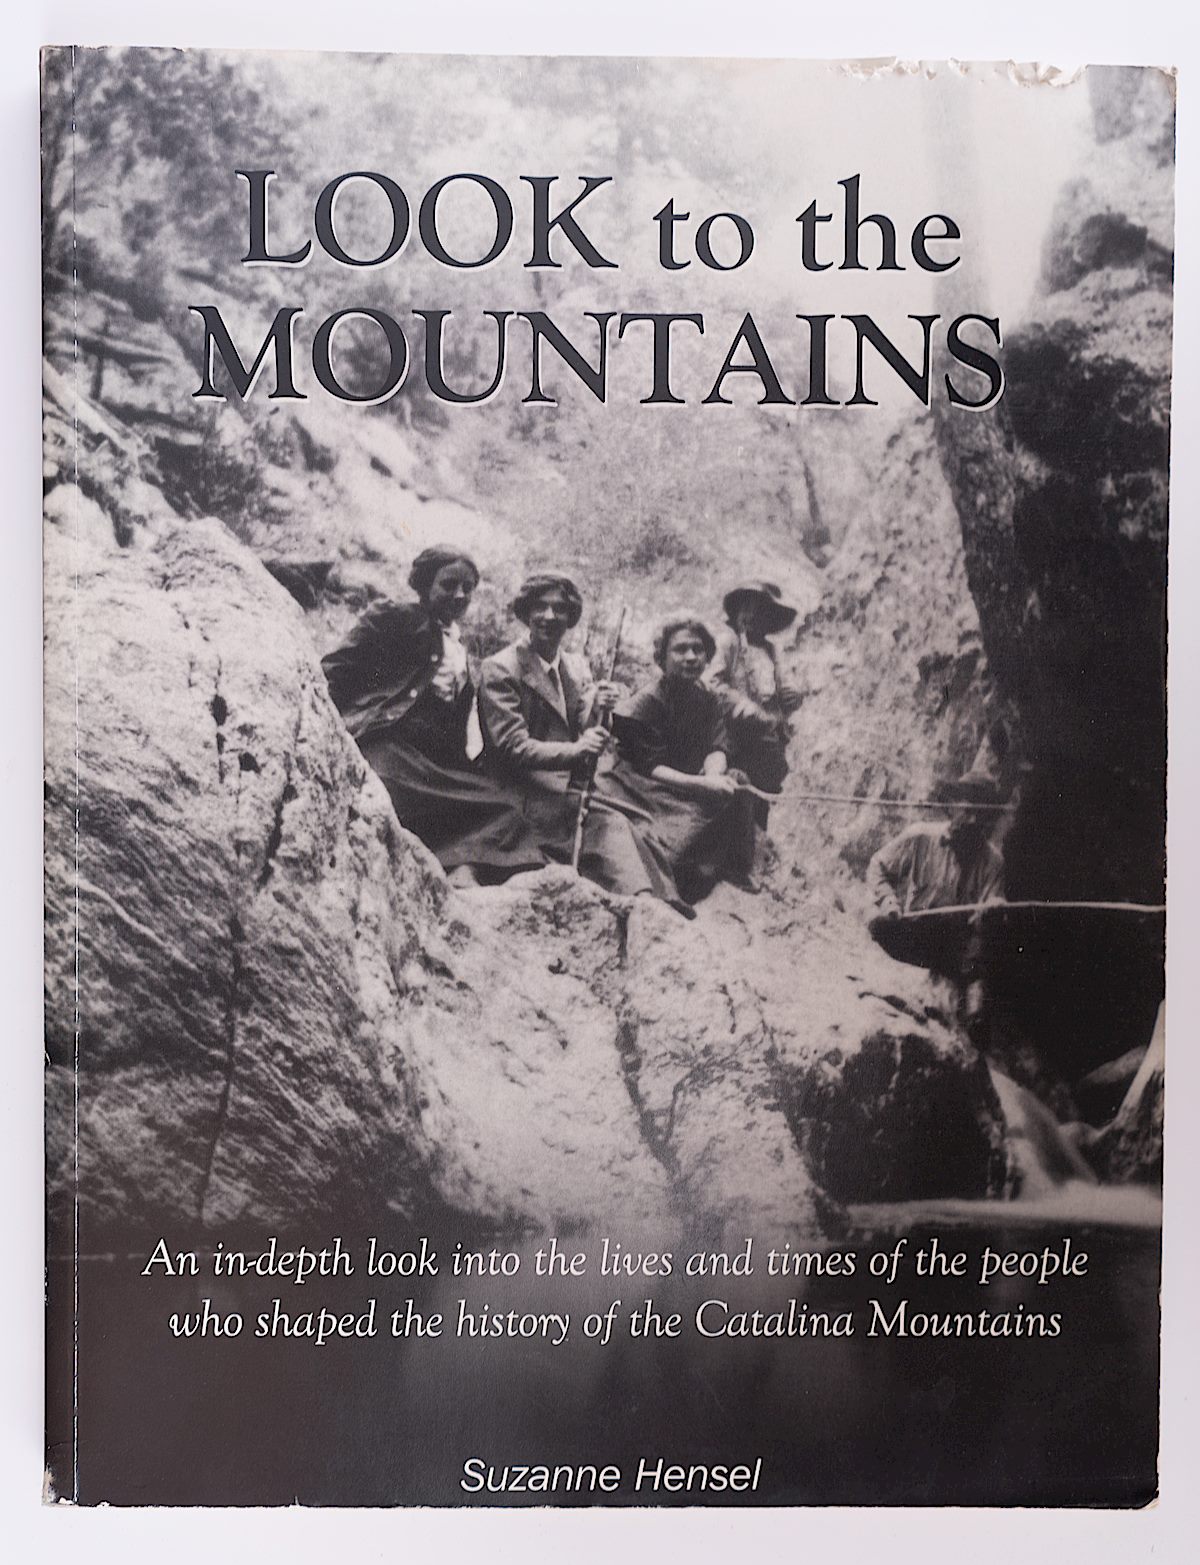 Look to the Mountains, An in-depth look into the lives and times of the people who shaped the history of the Catalina Mountains, Suzanne Hensel. March 2016.